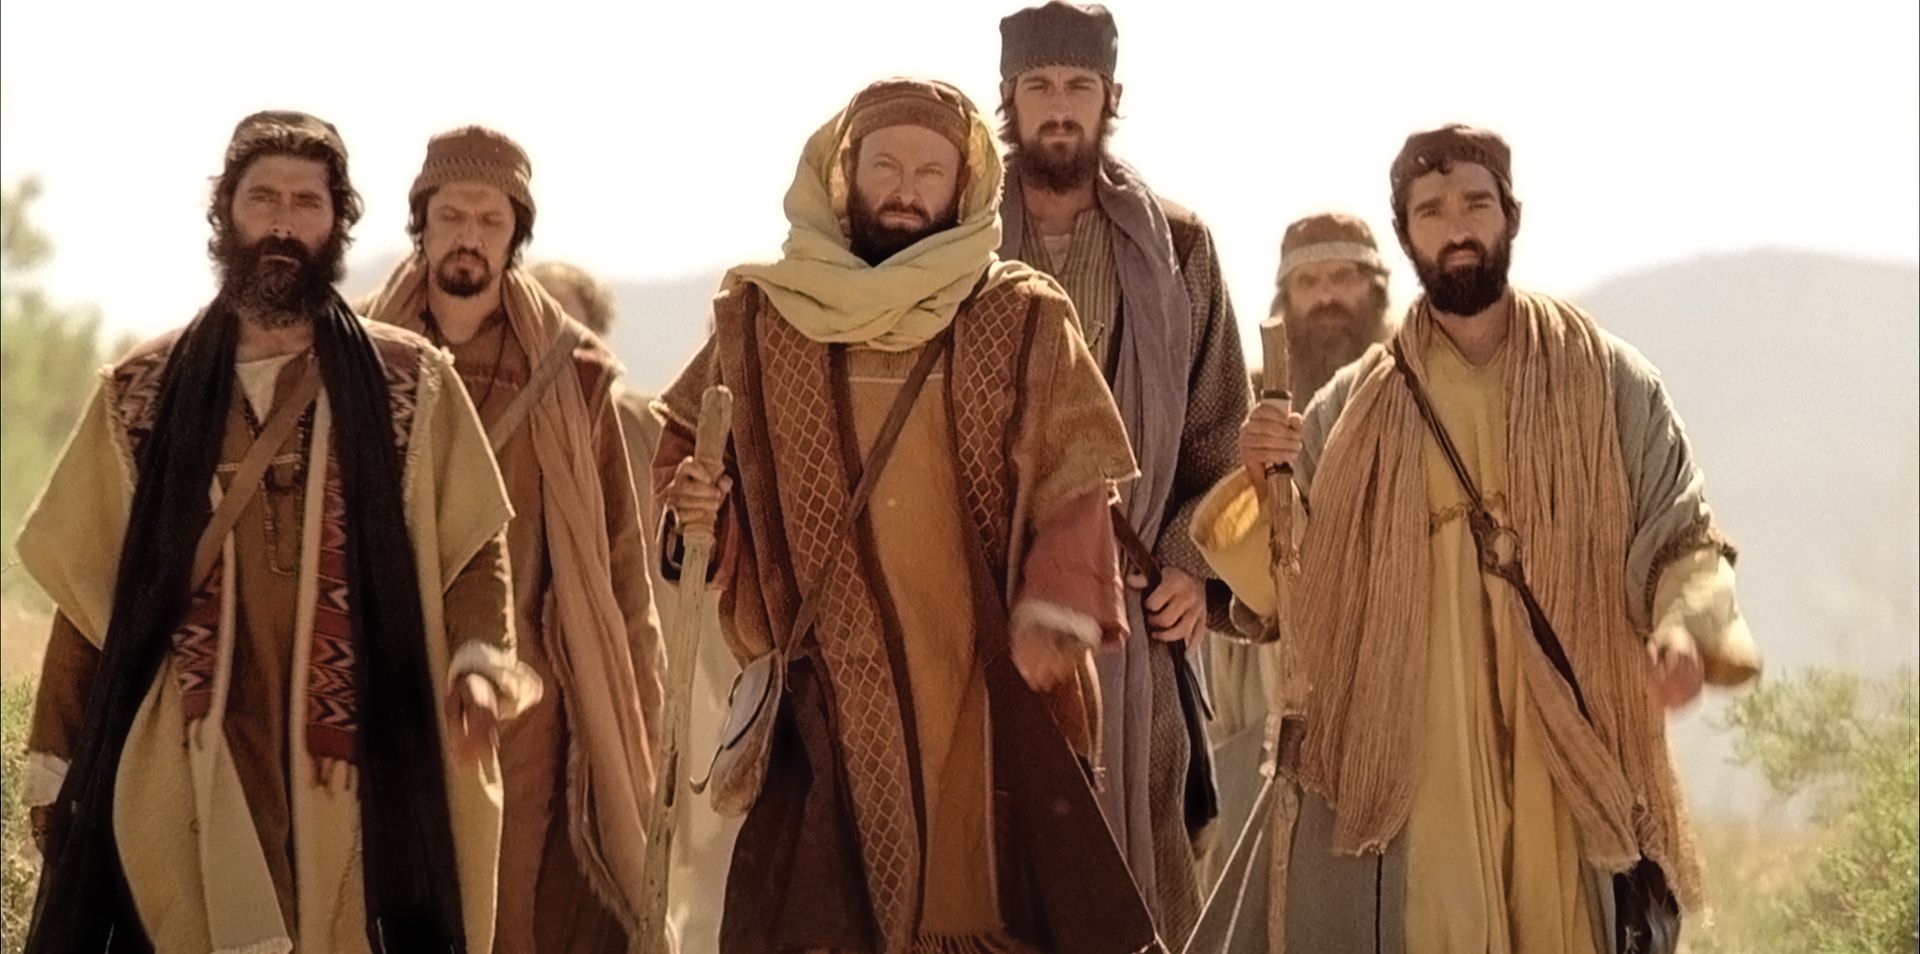 Saul travels with other men on the road to Damascus.